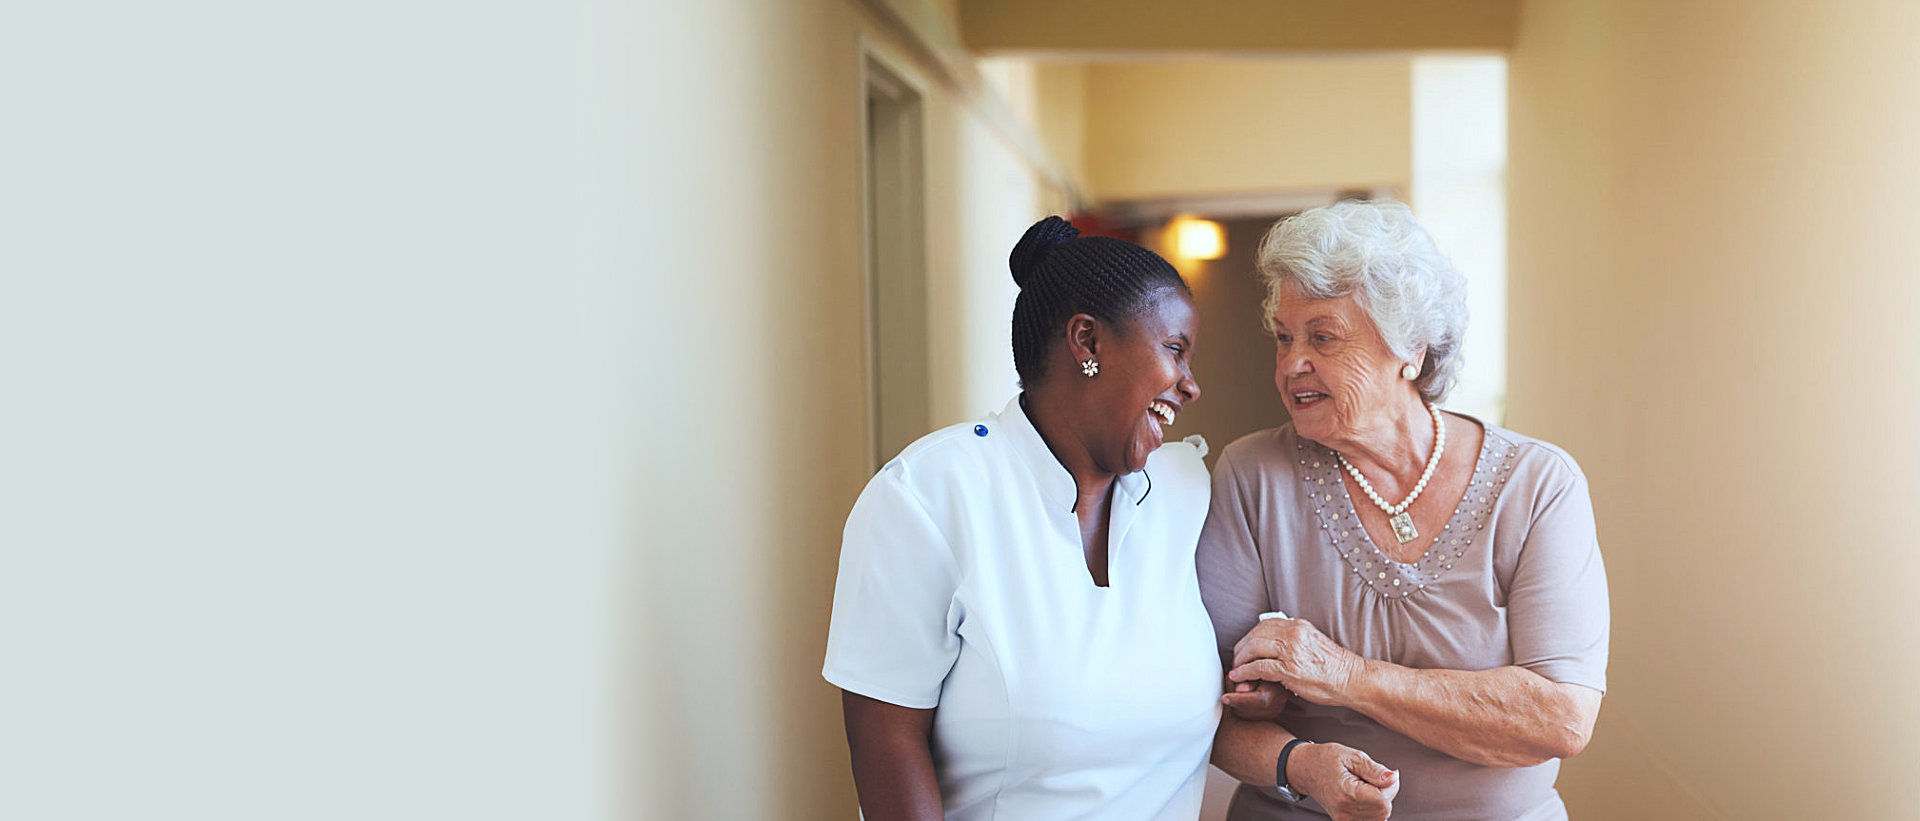 caregiver and patient looking at each other while smiling